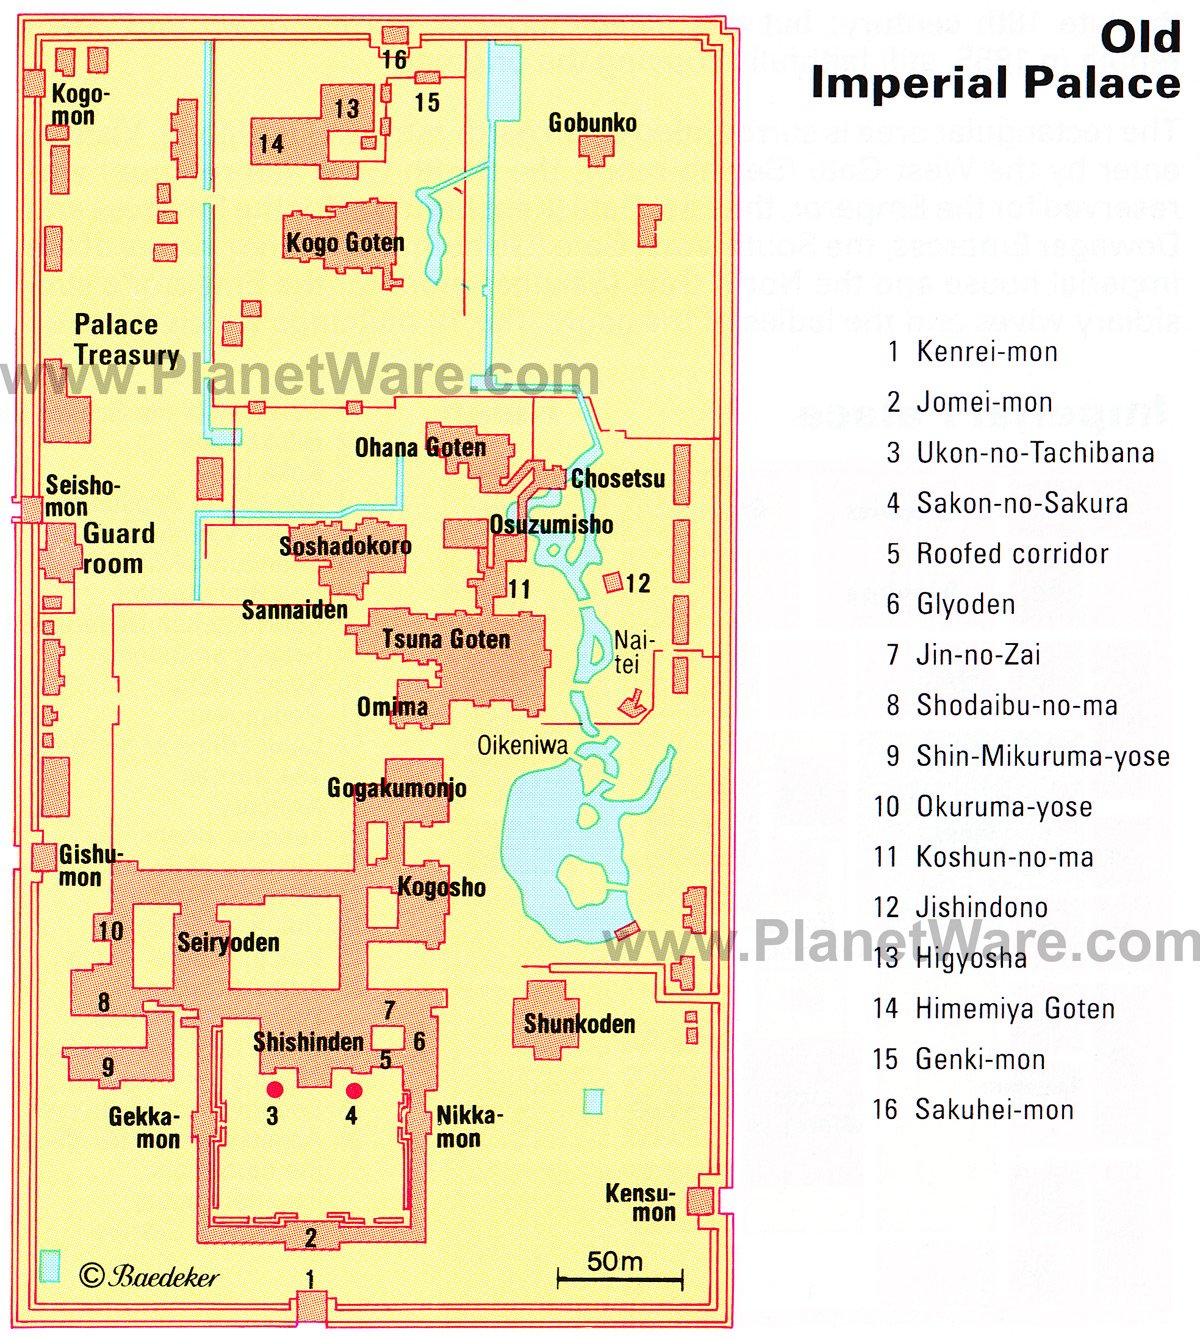 Old Imperial Palace